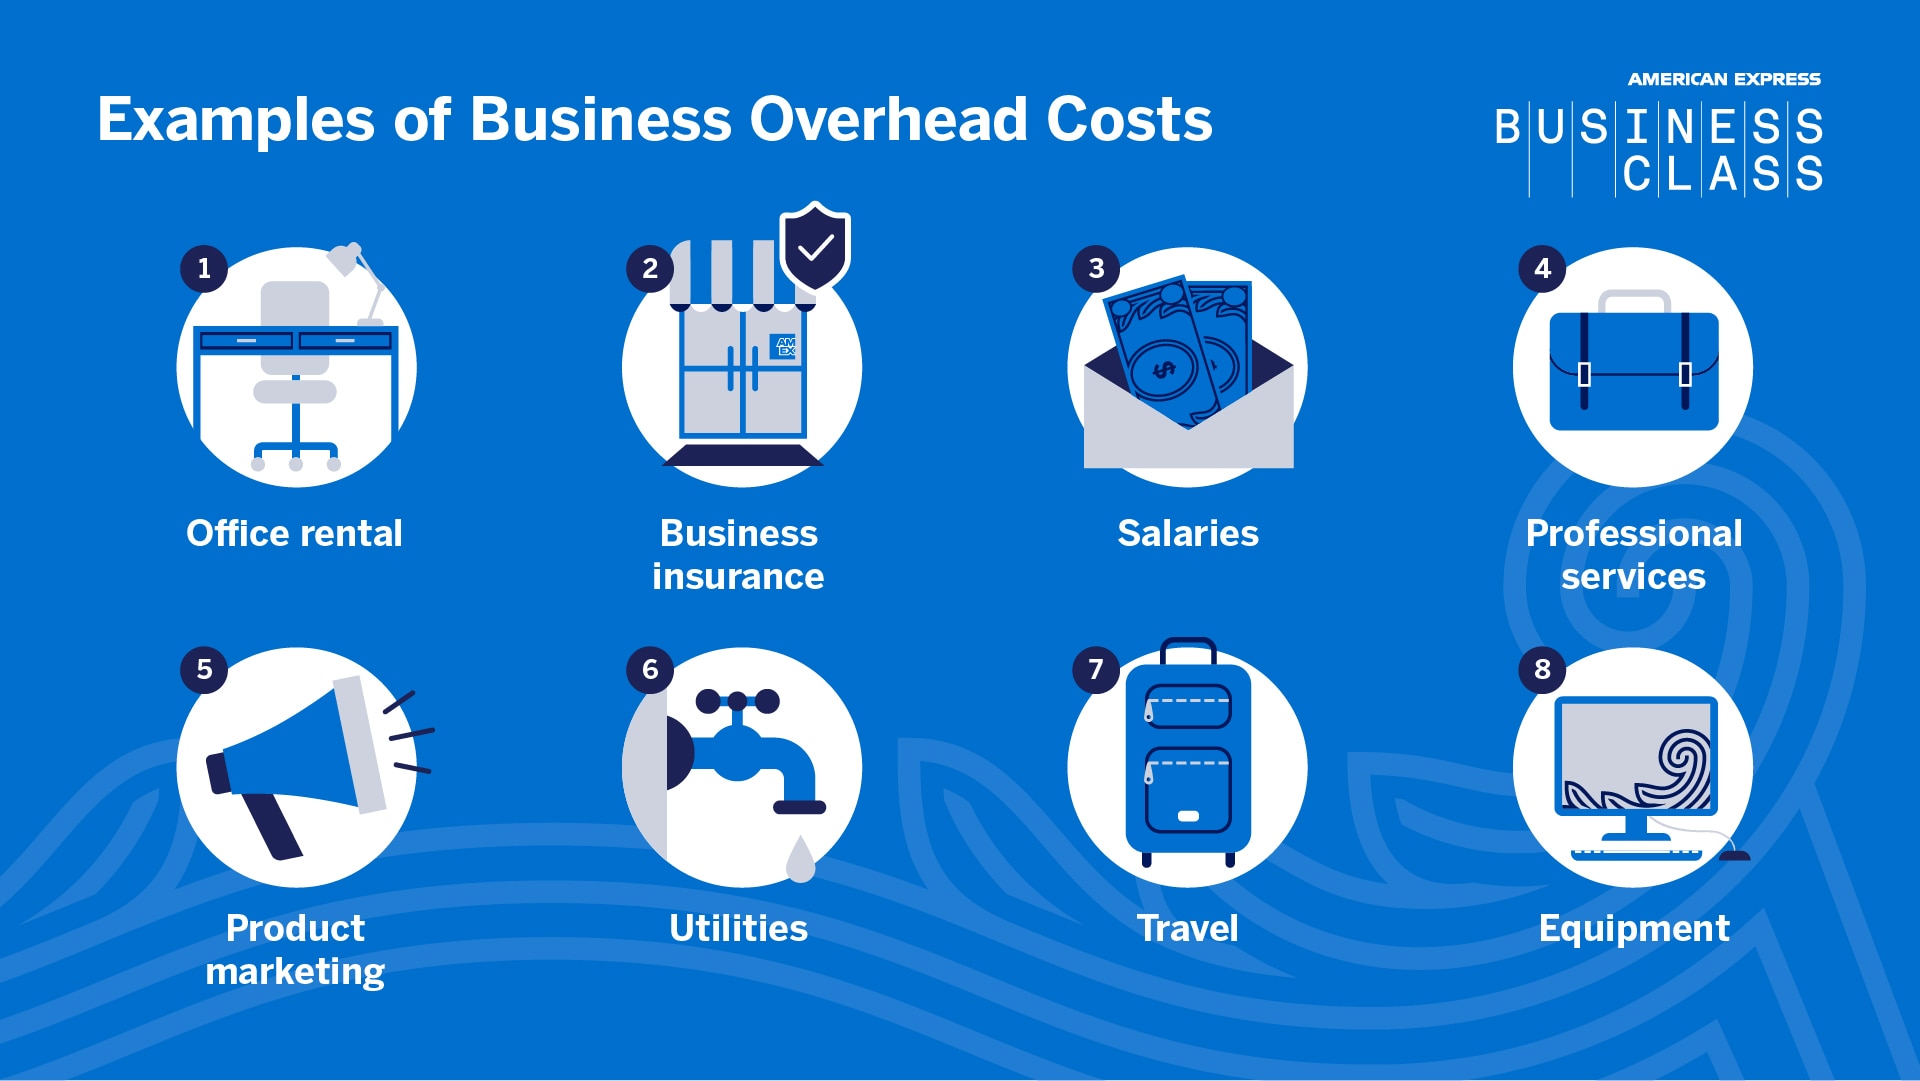 Amex_Graphic_BTI_Business_Overhead_Costs_V1